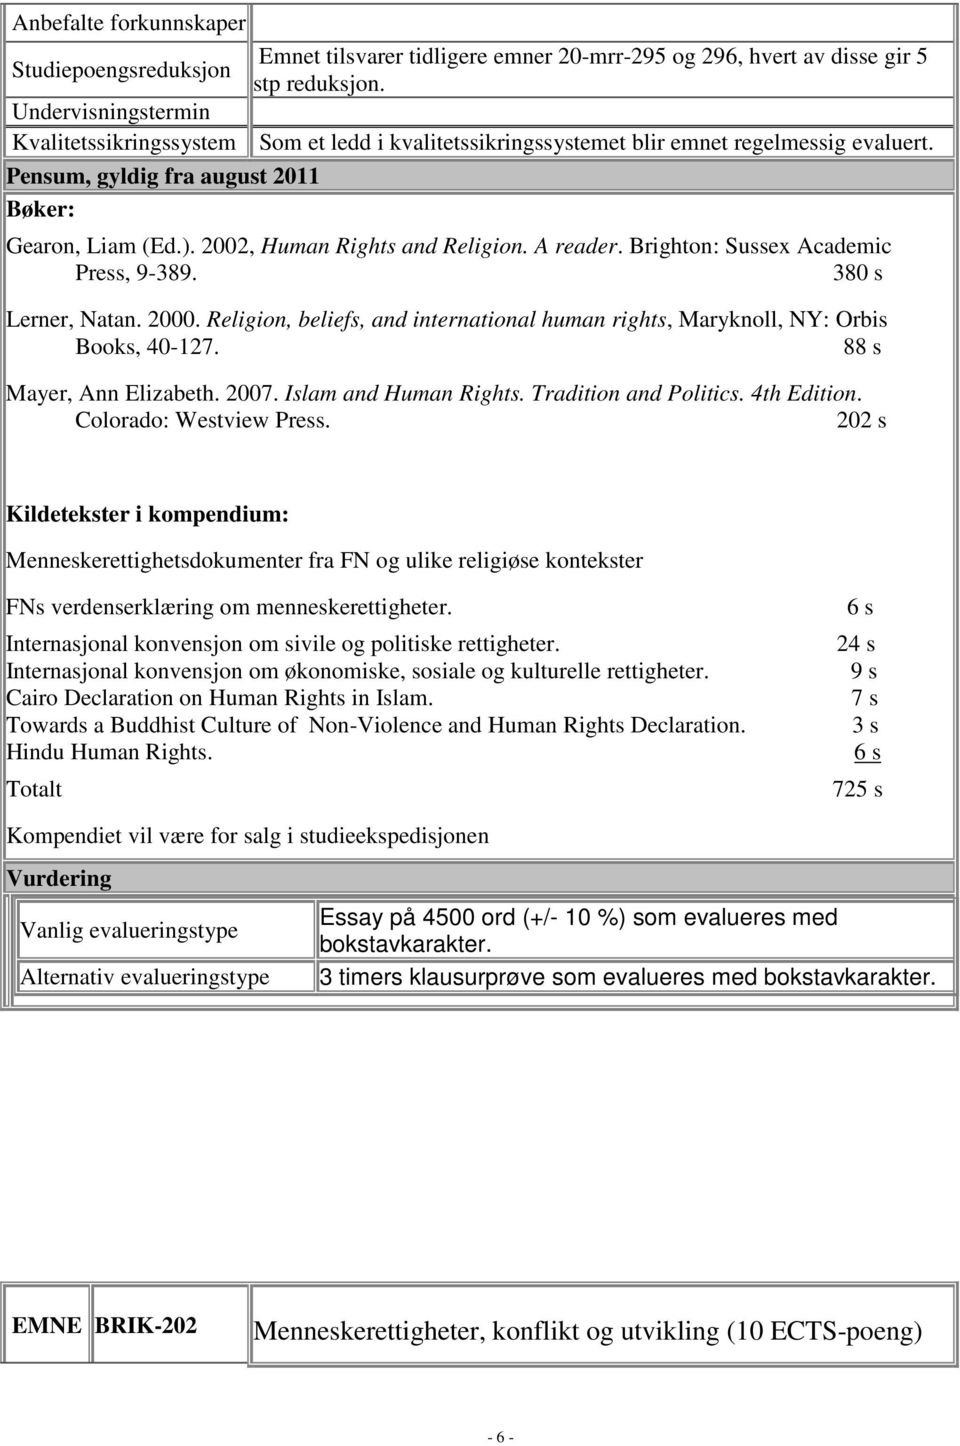 2002, Human Rights and Religion. A reader. Brighton: Sussex Academic Press, 9-389. 380 s Lerner, Natan. 2000. Religion, beliefs, and international human rights, Maryknoll, NY: Orbis Books, 40-127.